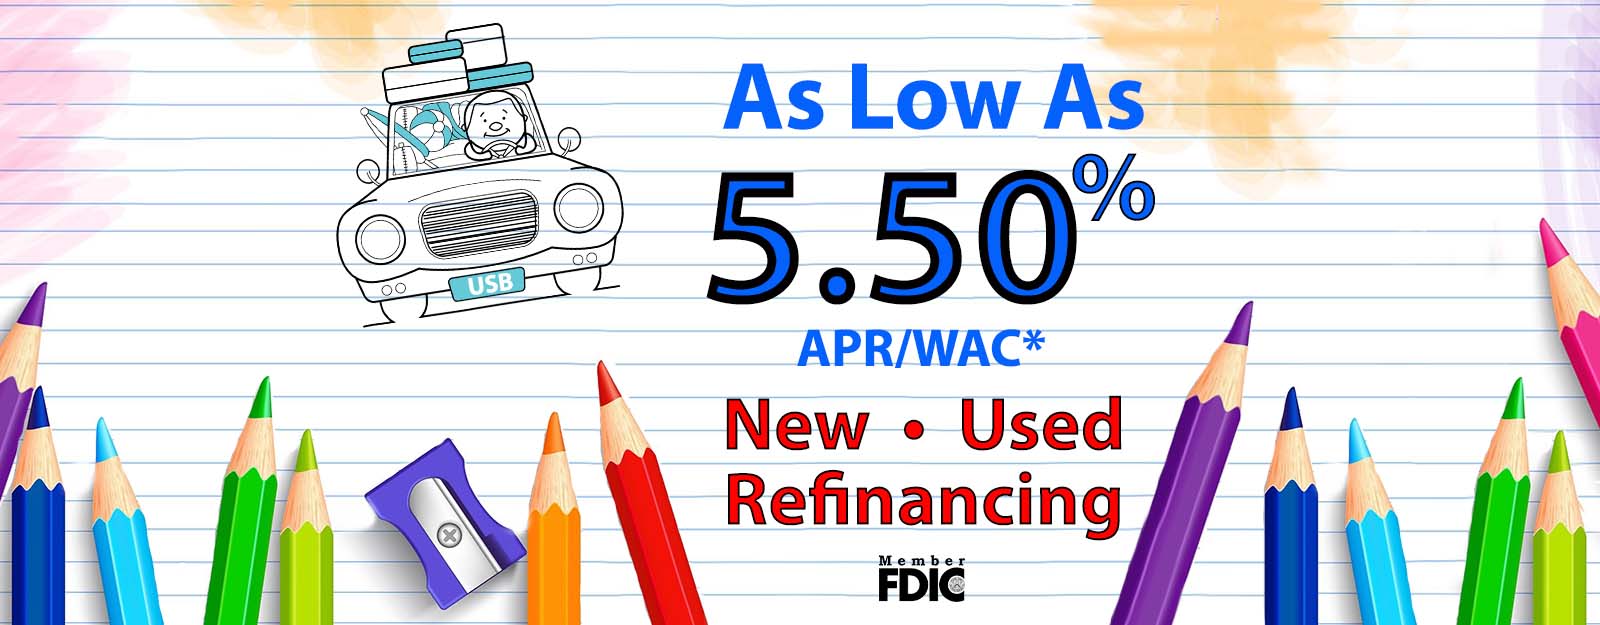 As low as 5.50% APR with approved credit. New Used Refinancing. Member FDIC. Colored pencils and notebook paper background.